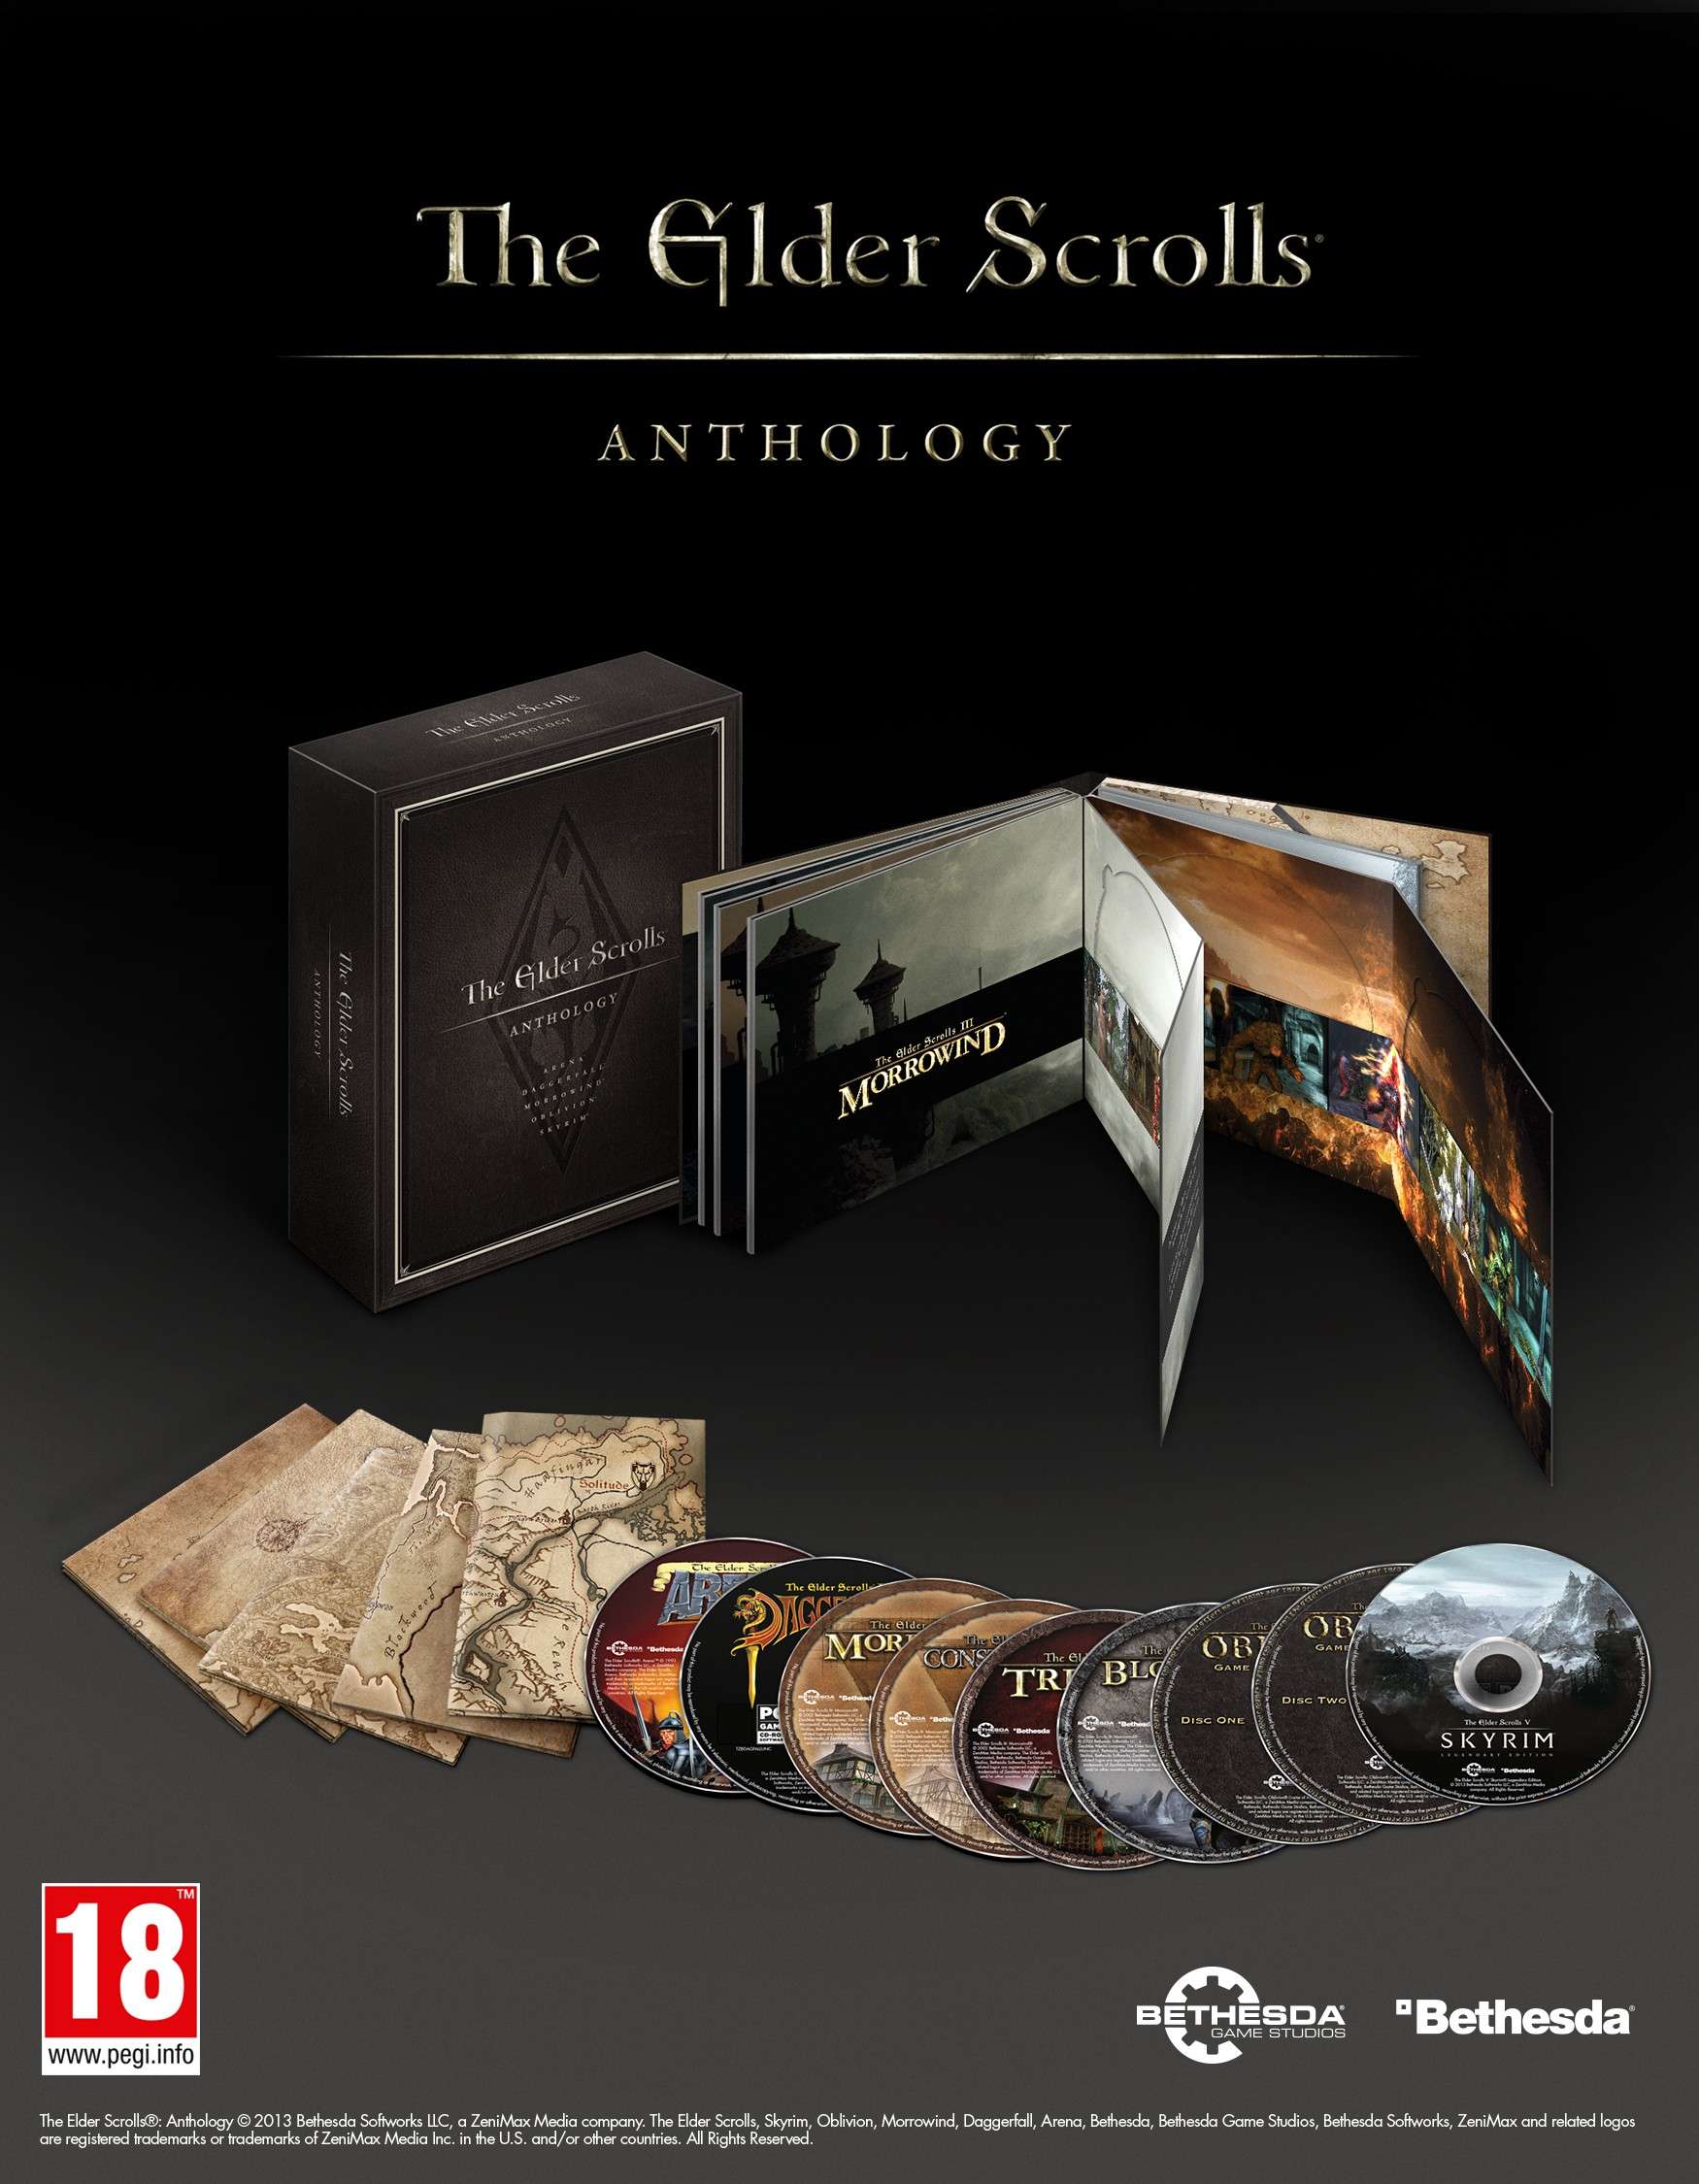 The Elder Scrolls Anthology - Bethesda annonce sa sortie sur PC Tes_an10